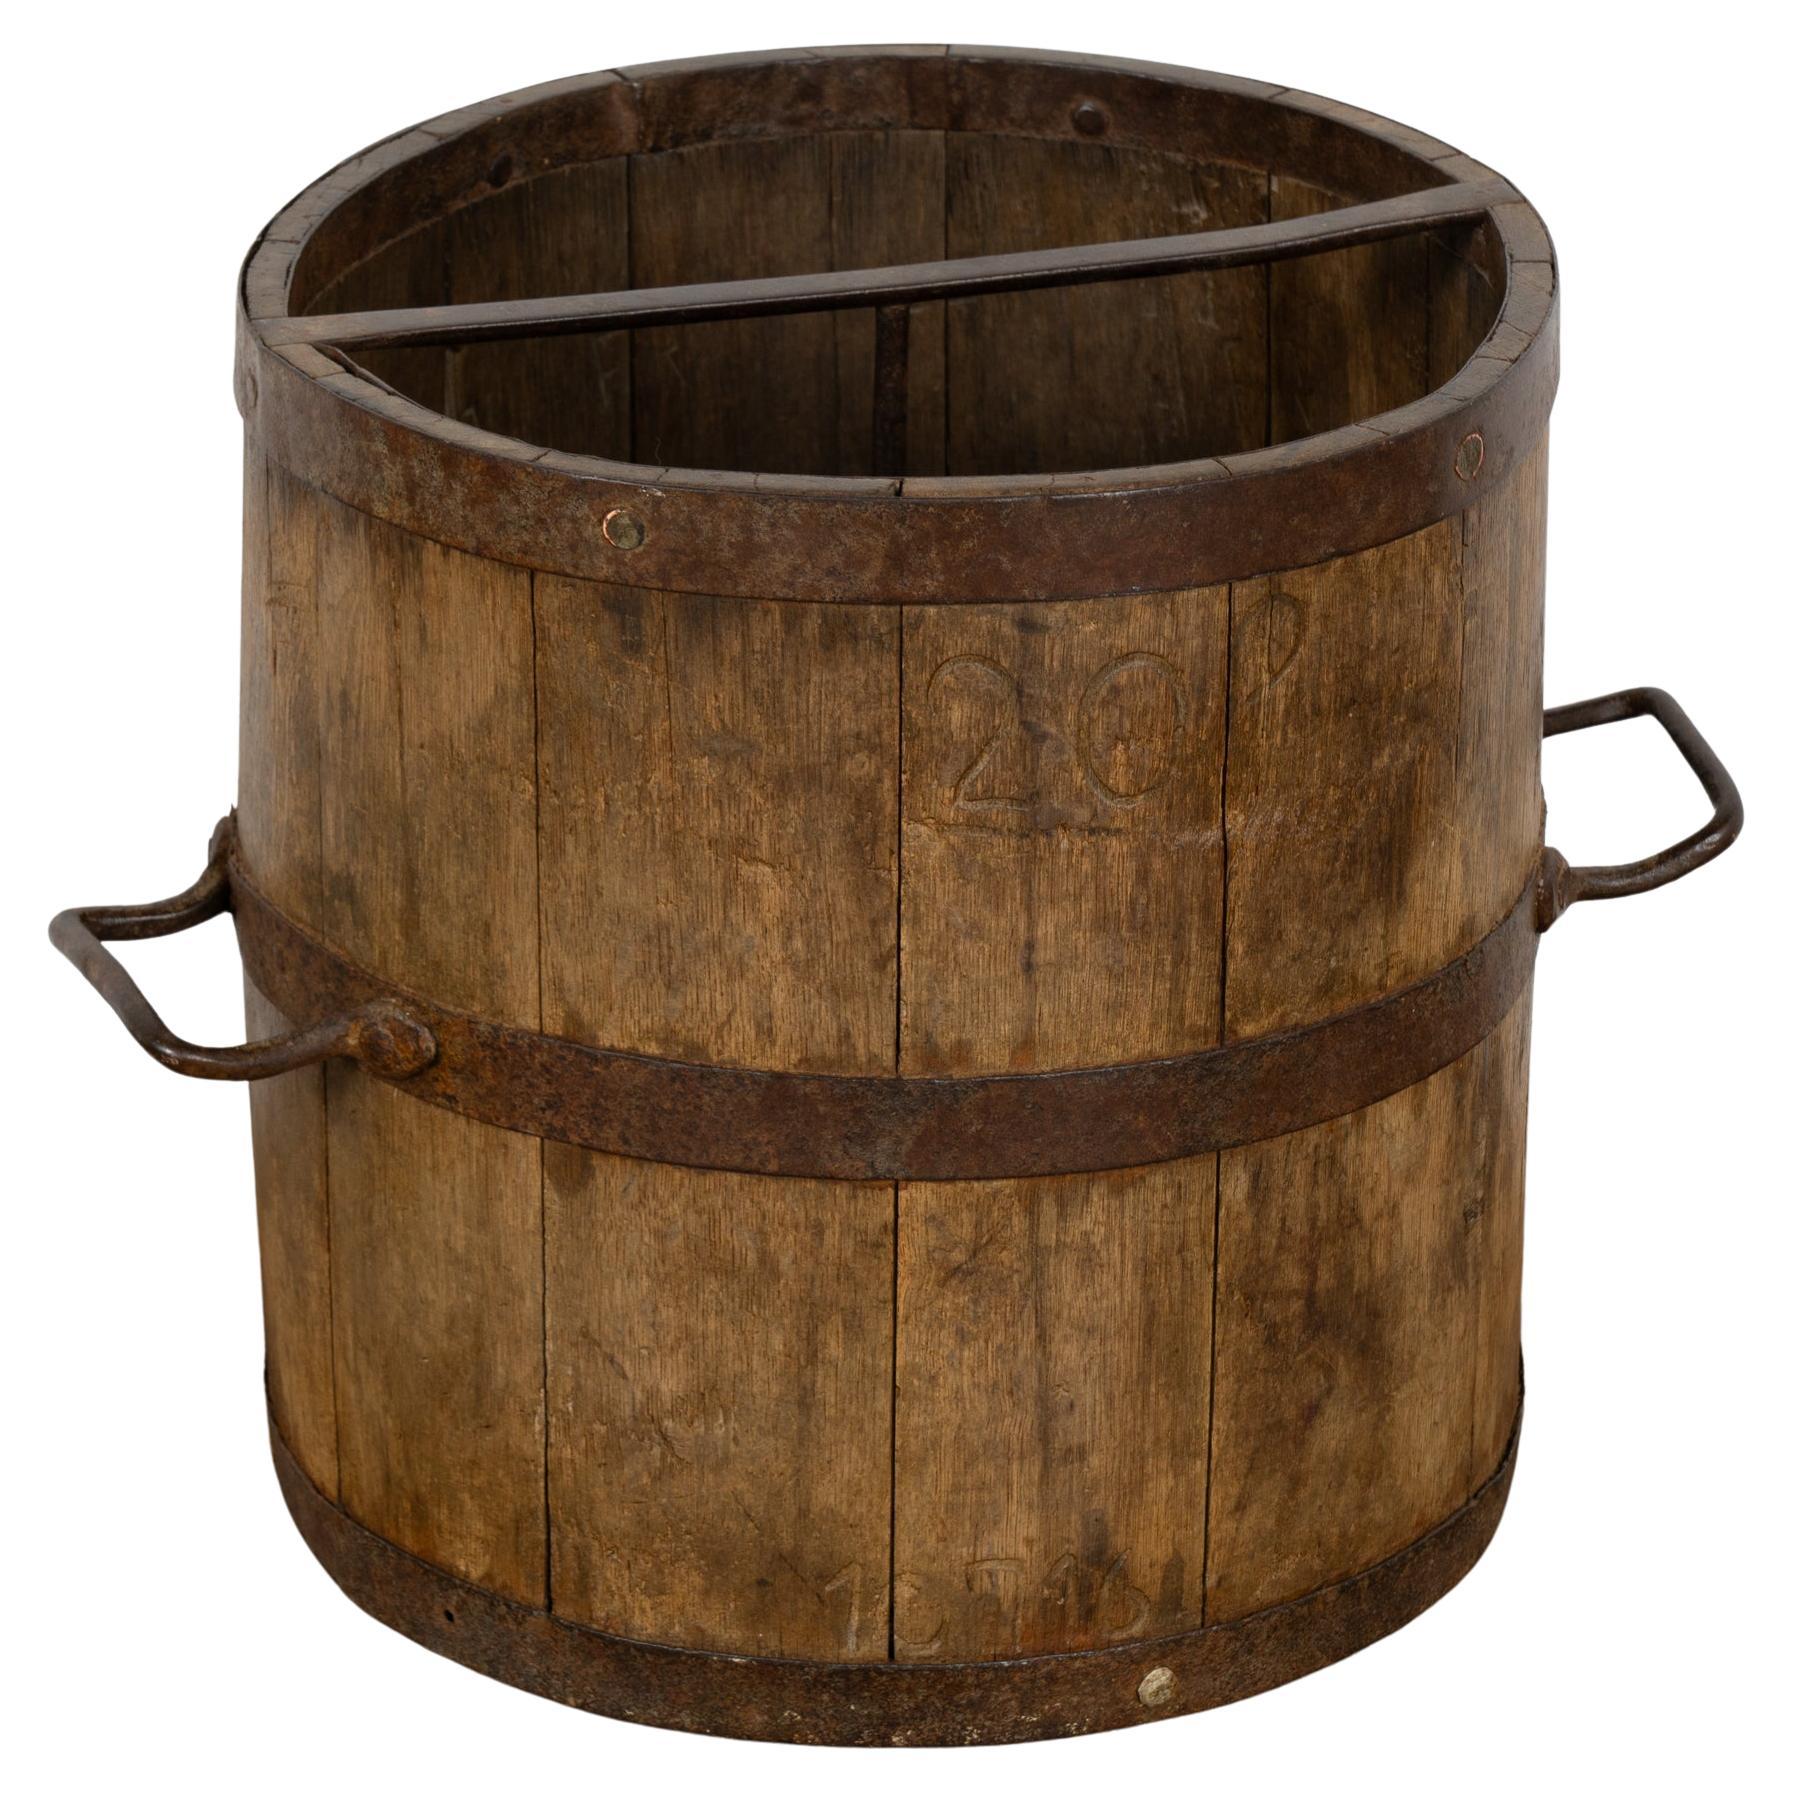 Oak Measuring Bucket with Metal Bands and Handles, Hungary circa 1920